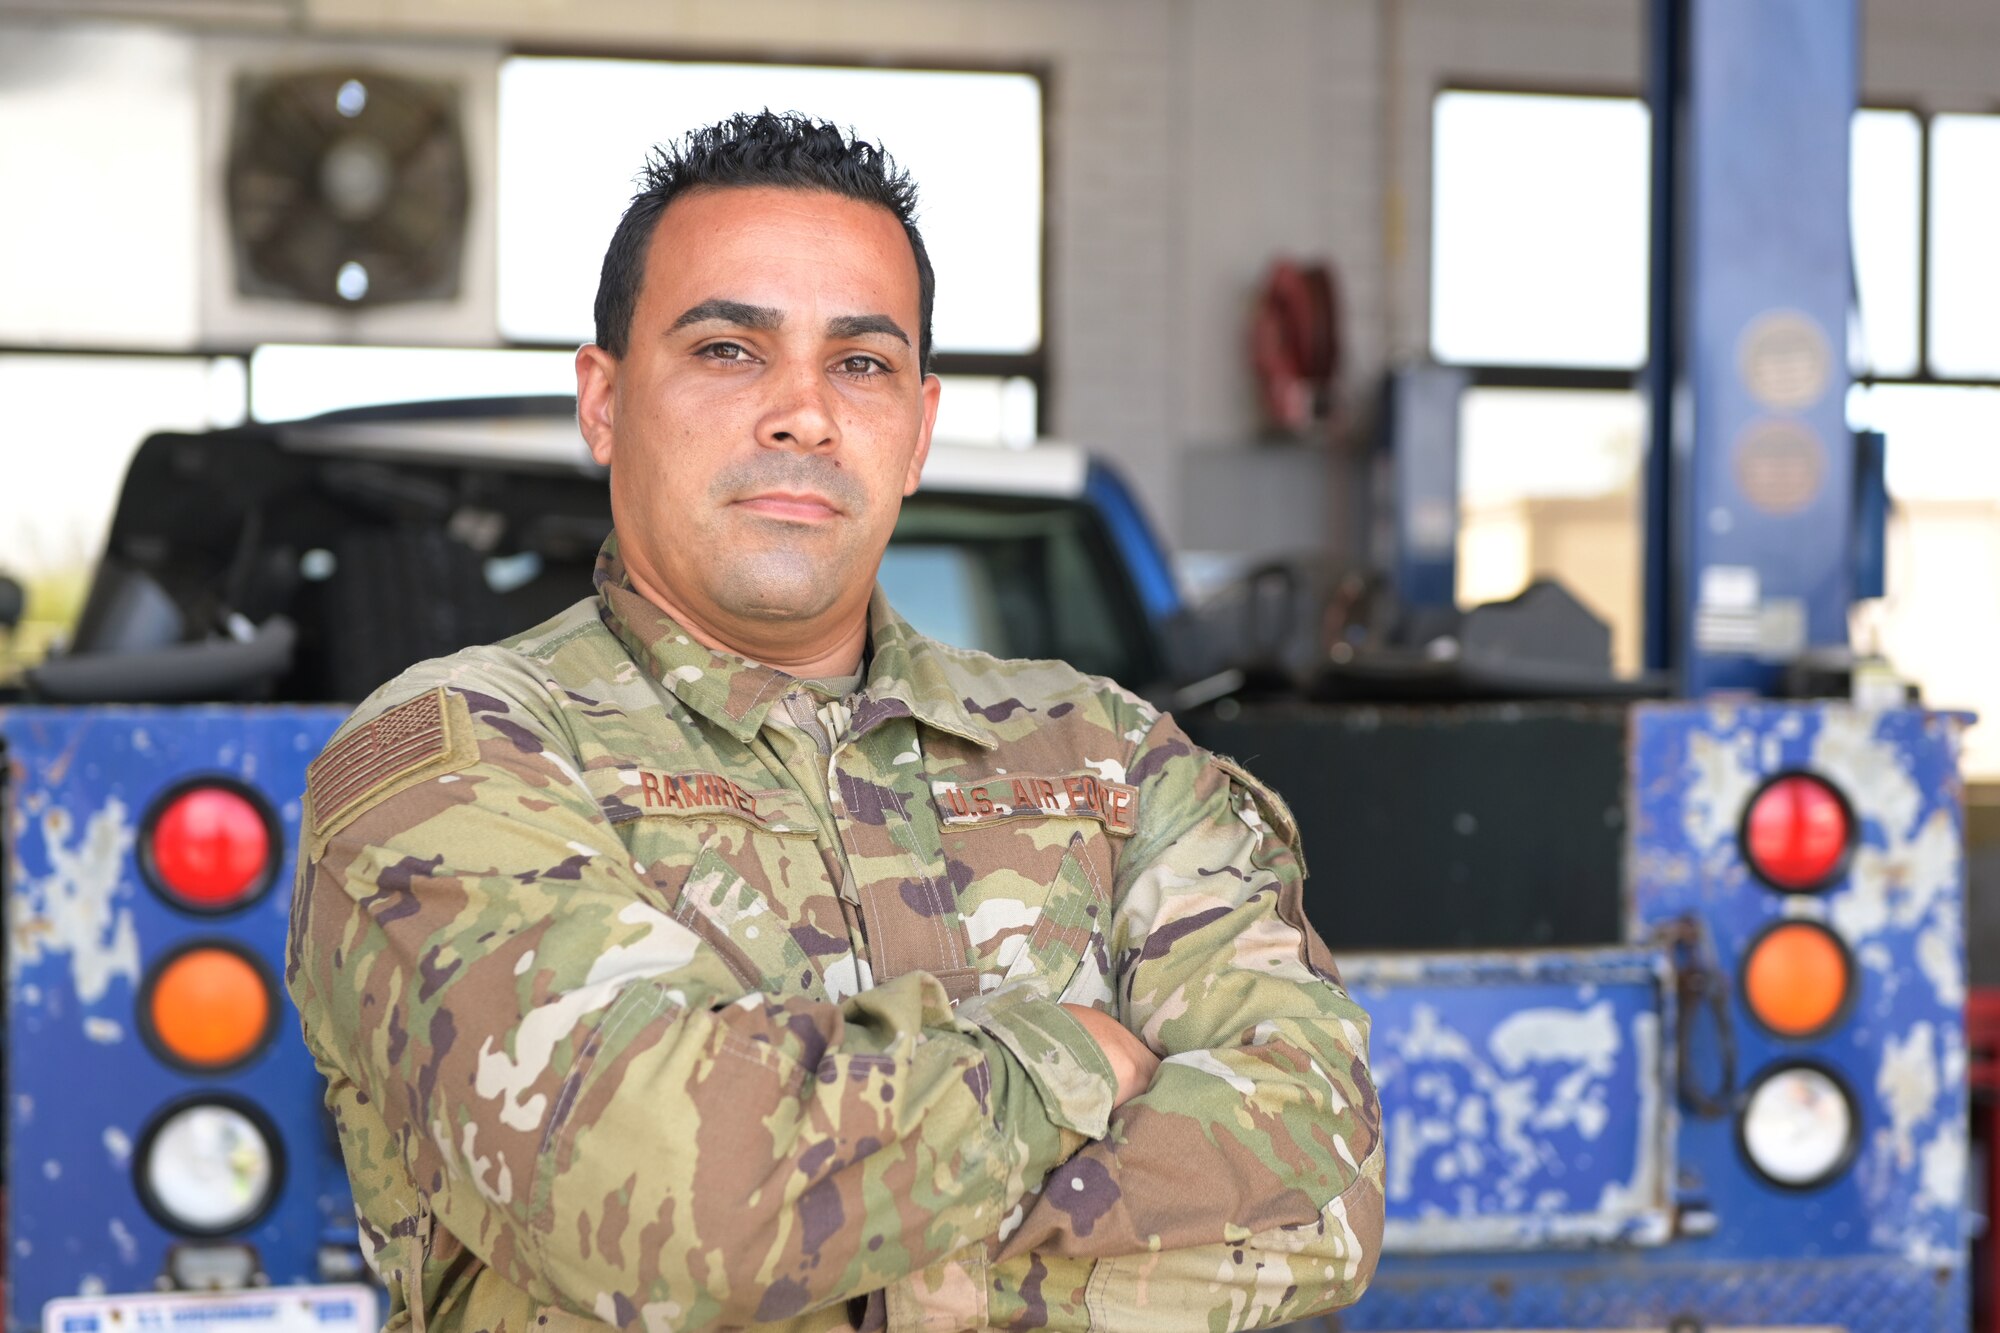 U.S. Air Force Staff Sgt. David Ramirez, heavy mobile equipment mechanic, 156th Logistics Readiness Squadron, poses for a picture at Muñiz Air National Guard Base, Puerto Rico Air National Guard, April 20, 2021. (U.S. Air National Guard photo by Staff Sgt. Eliezer Soto)